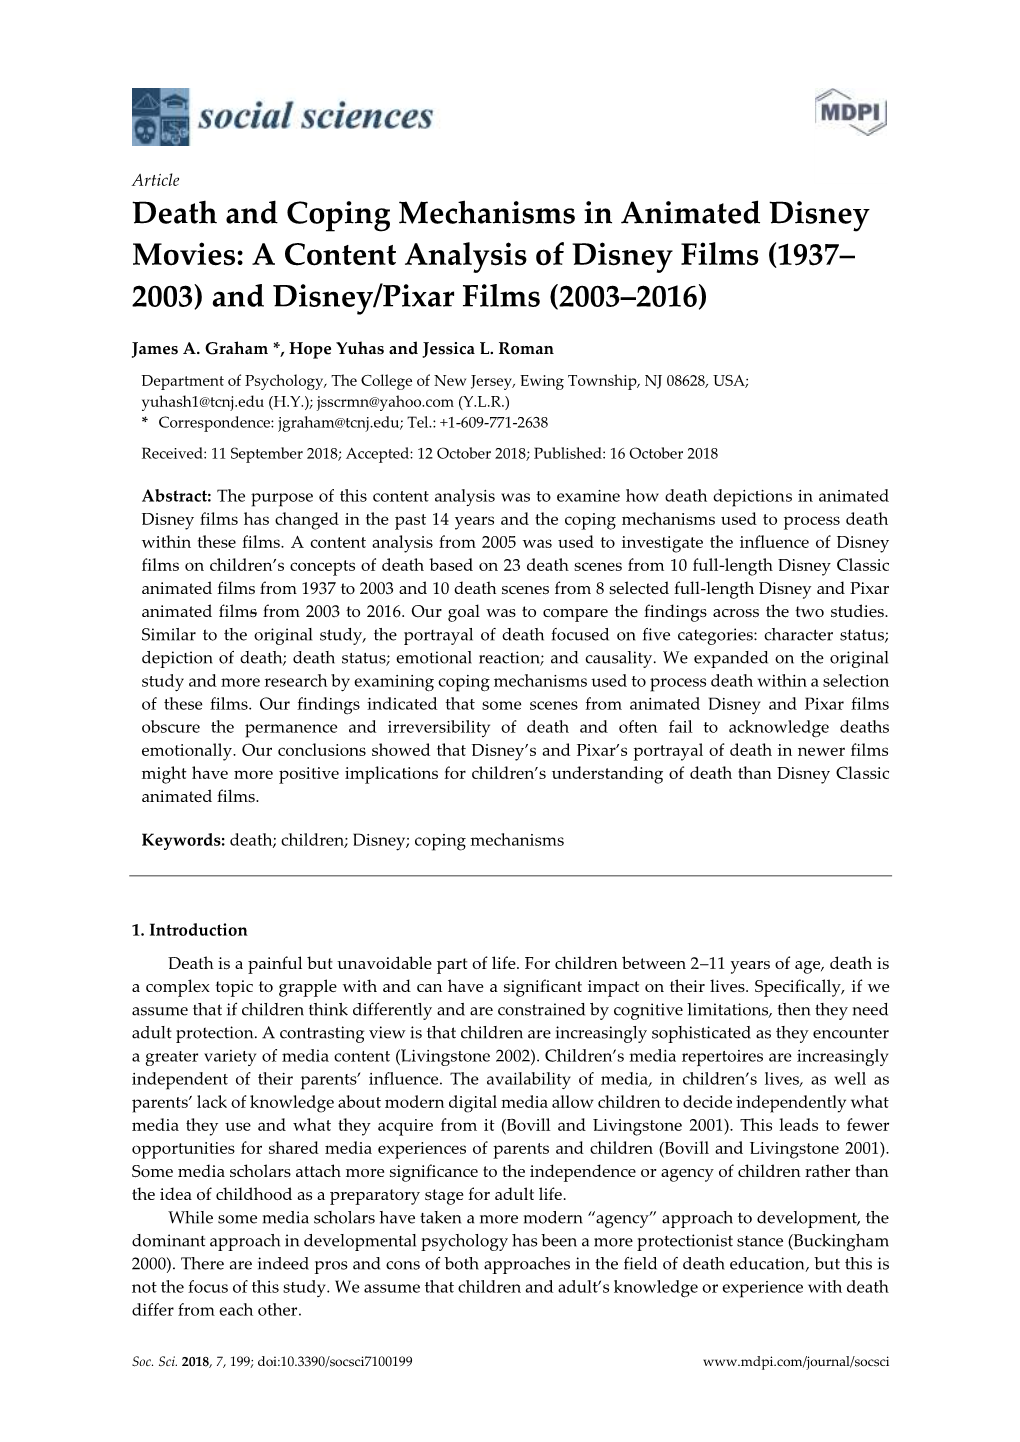 Death and Coping Mechanisms in Animated Disney Movies: a Content Analysis of Disney Films (1937– 2003) and Disney/Pixar Films (2003–2016)